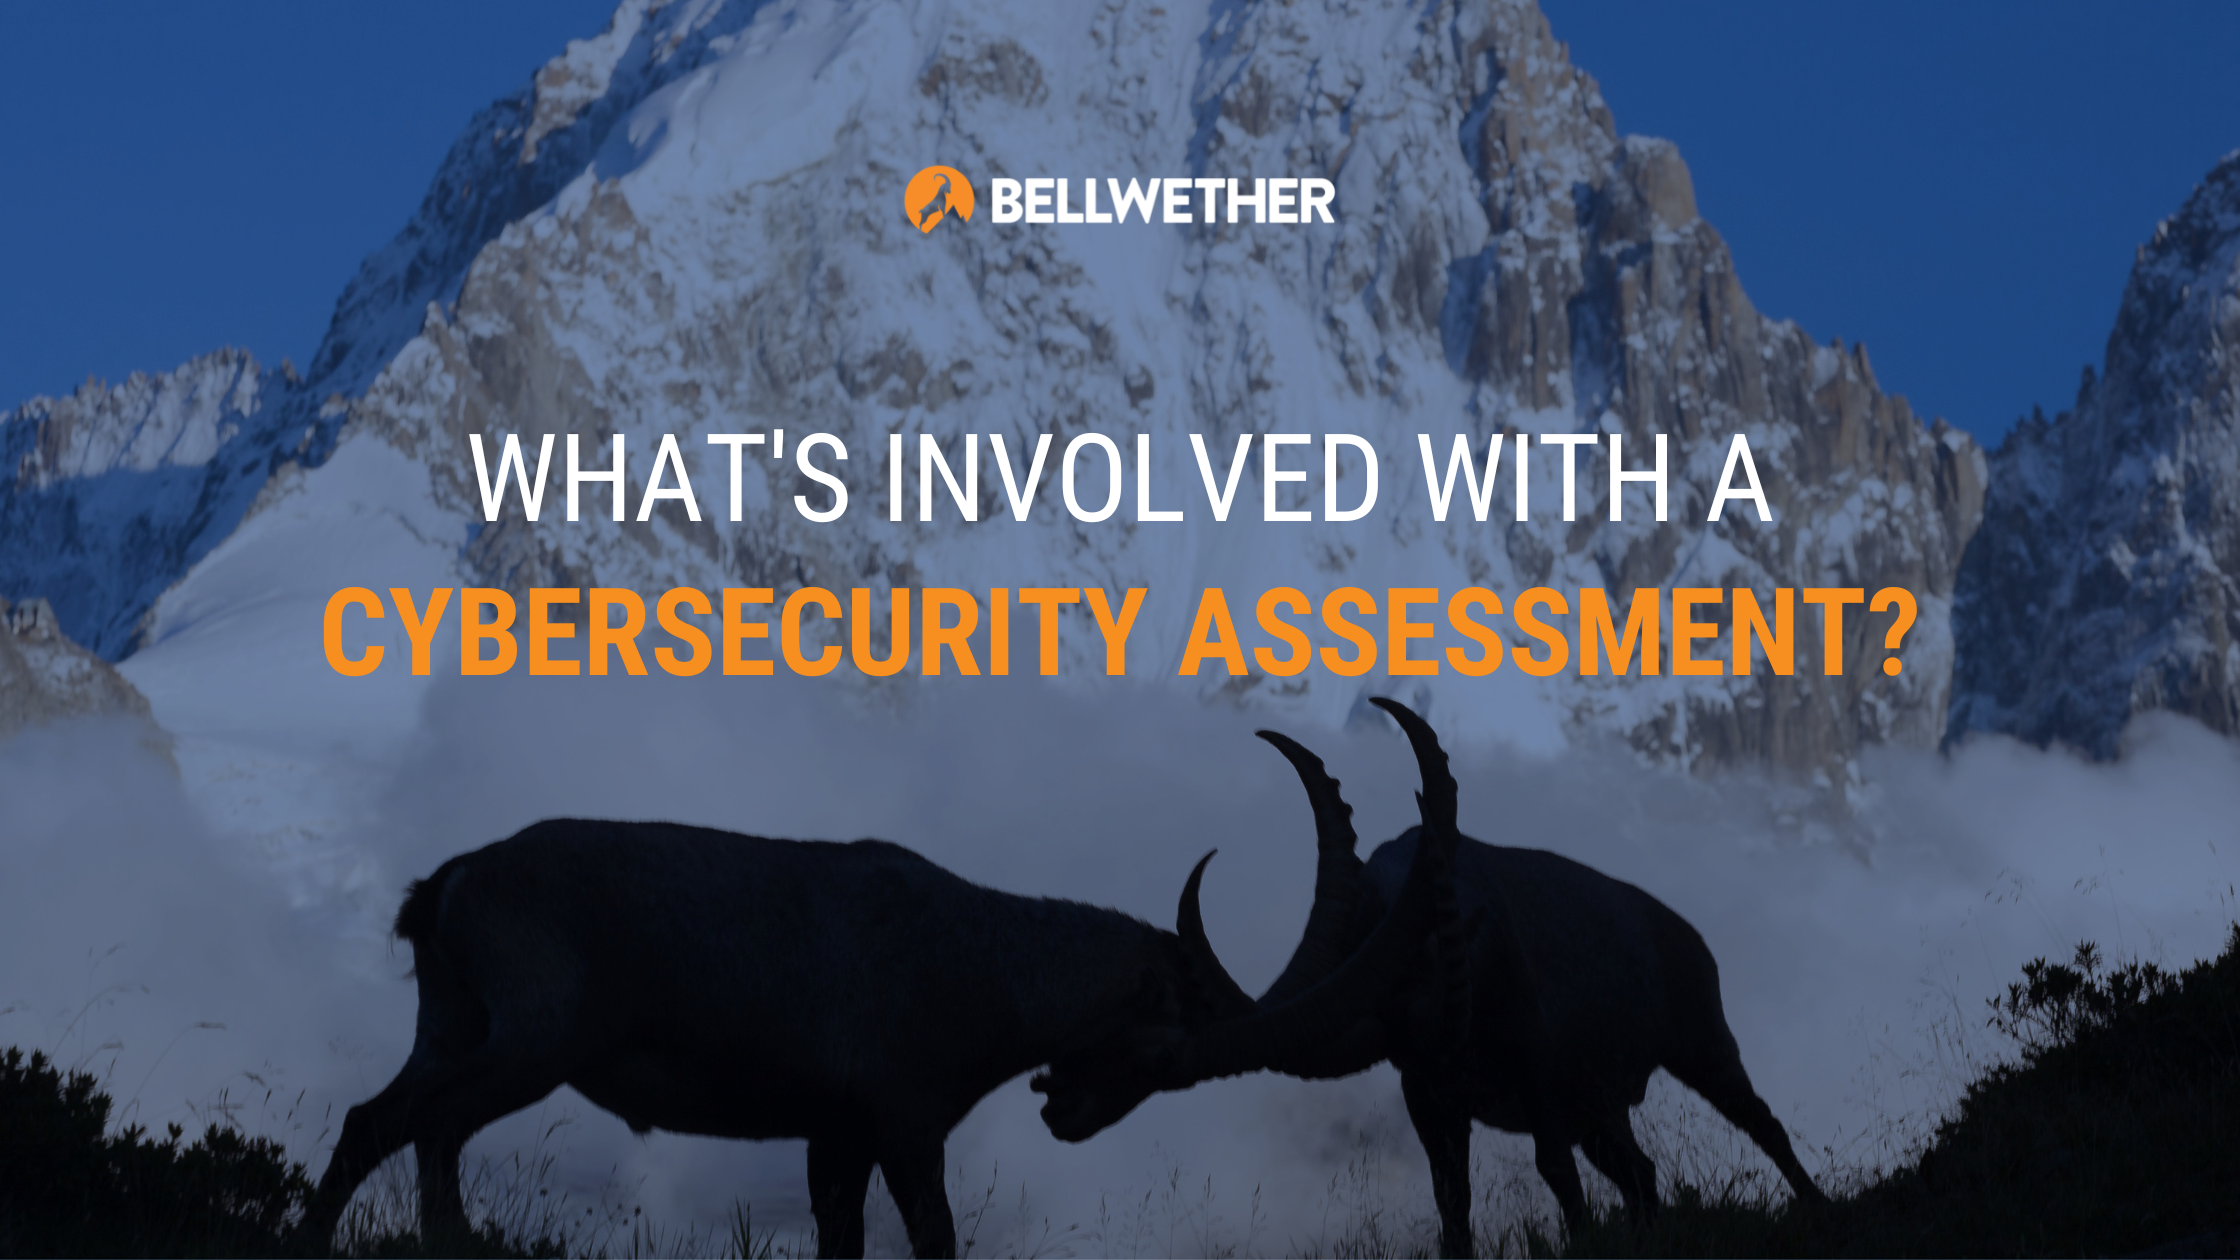 What's involved with a cybersecurity assessment?